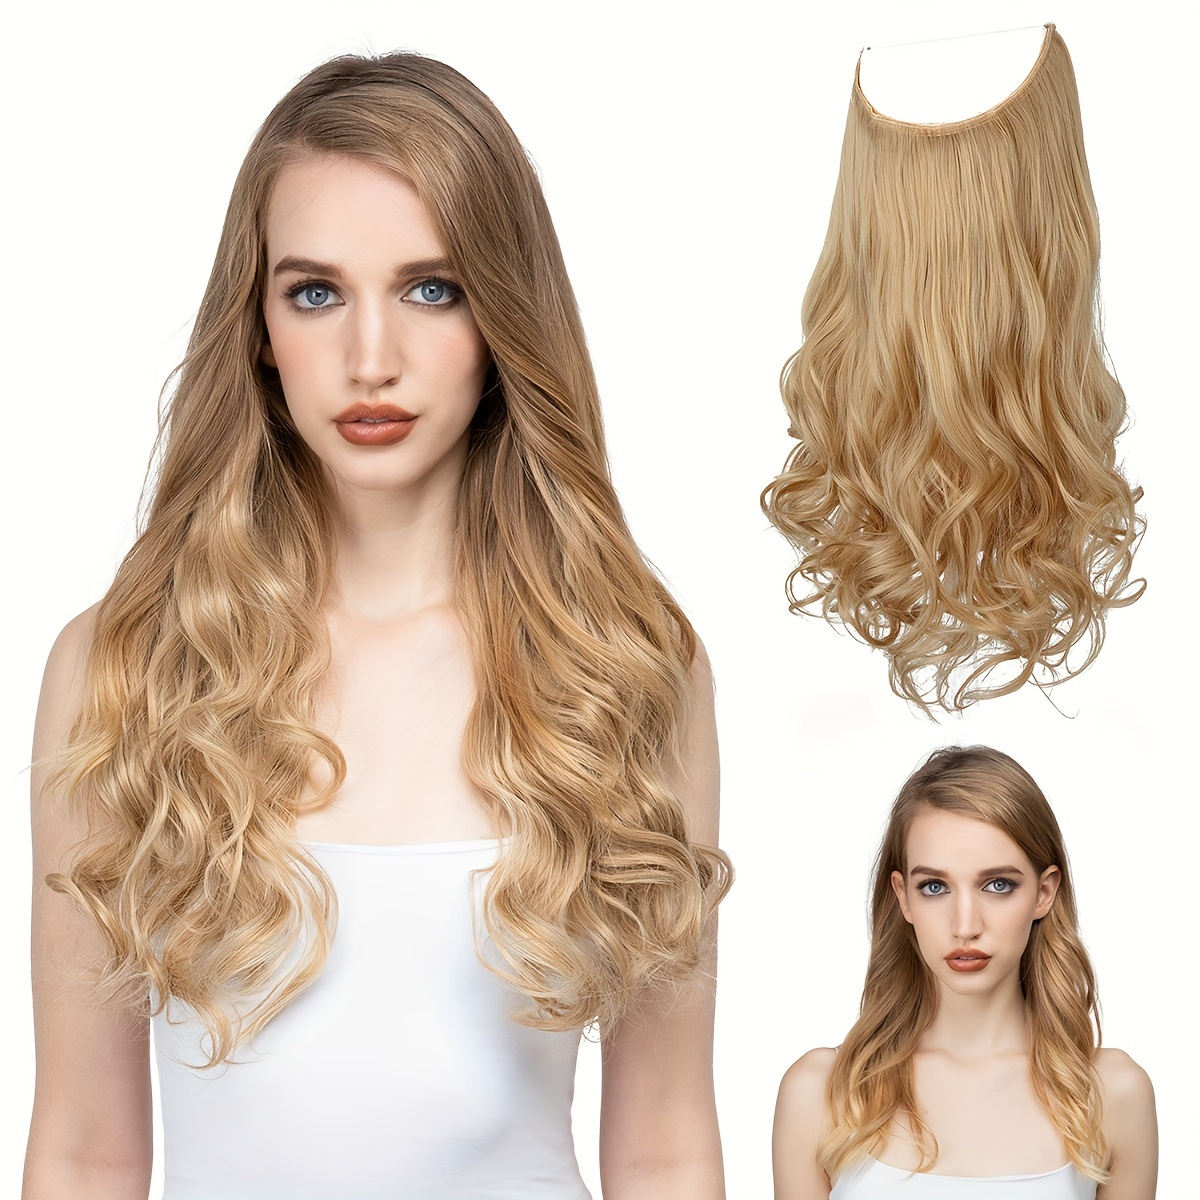 SHCKE Secret Hair Extensions 20 Inch Invisible Dirty Blonde Hair Extension  Hidden Curly Hair Extensions with Transparent Wire Removable Secure Clips